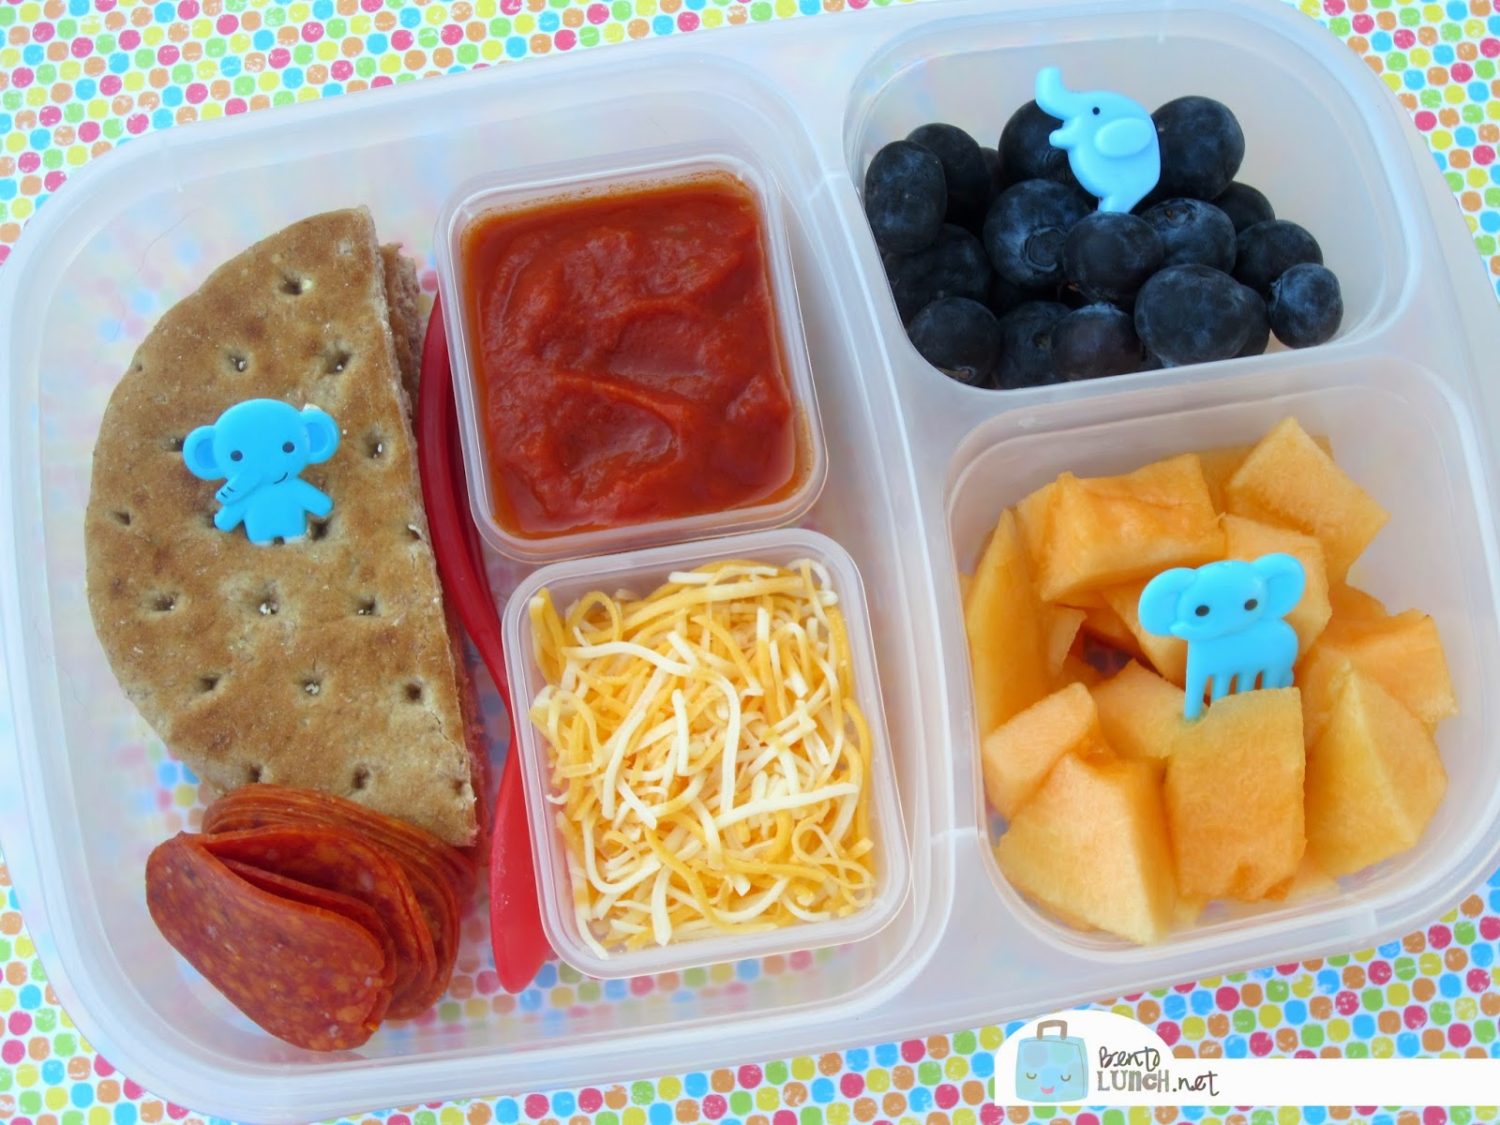 30 School Lunch Ideas That are Easy and Healthy - Baby Chick